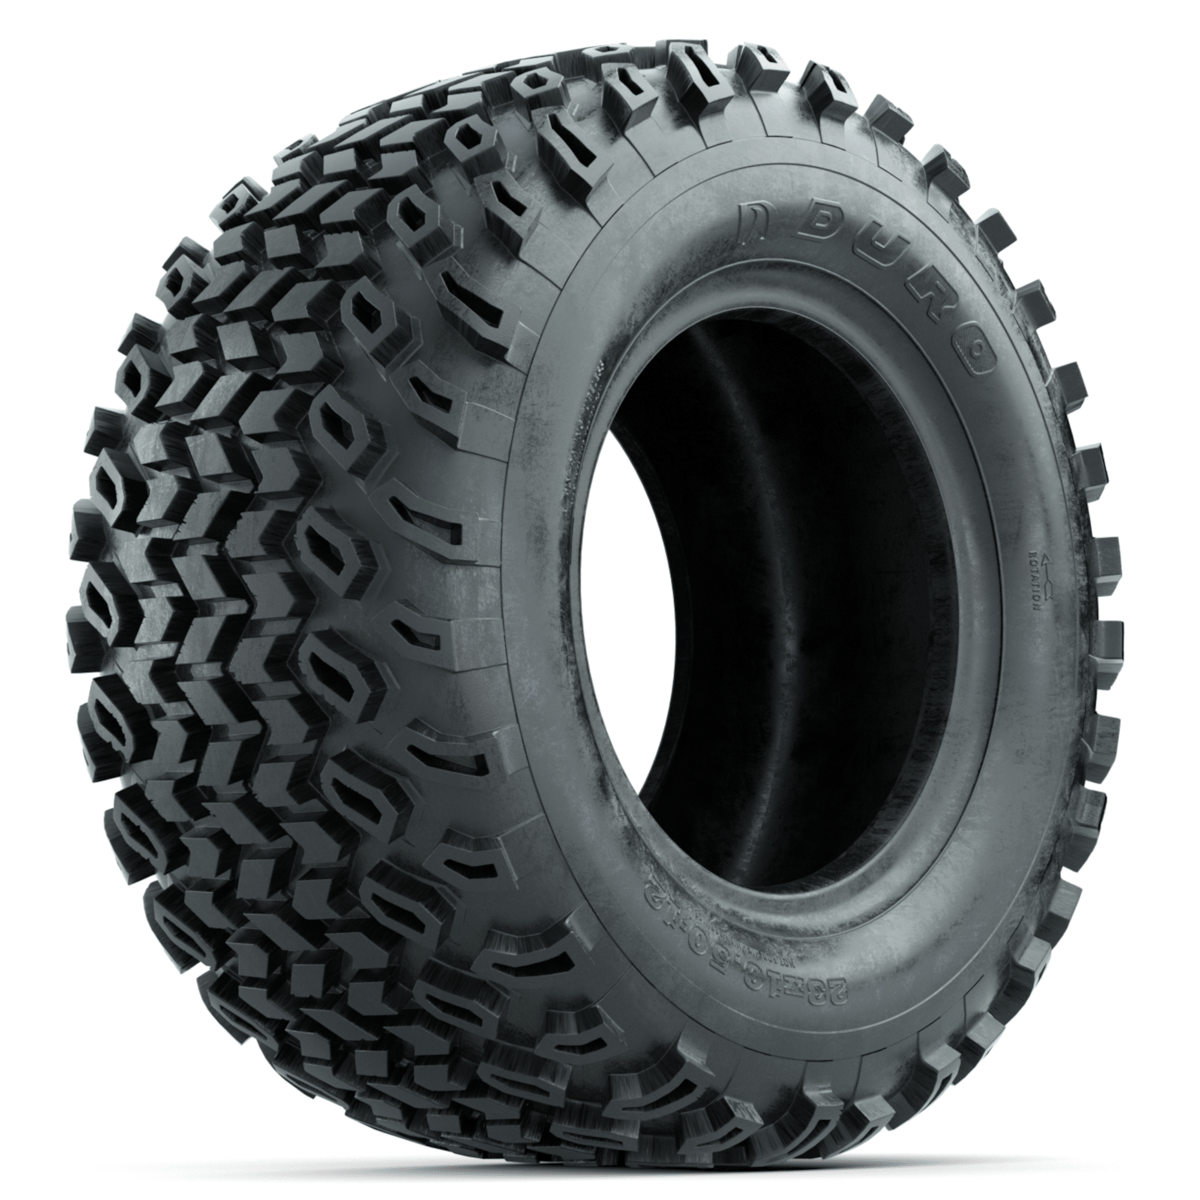 23x10.50-12 Duro Desert A/T Tire (Lift Required)